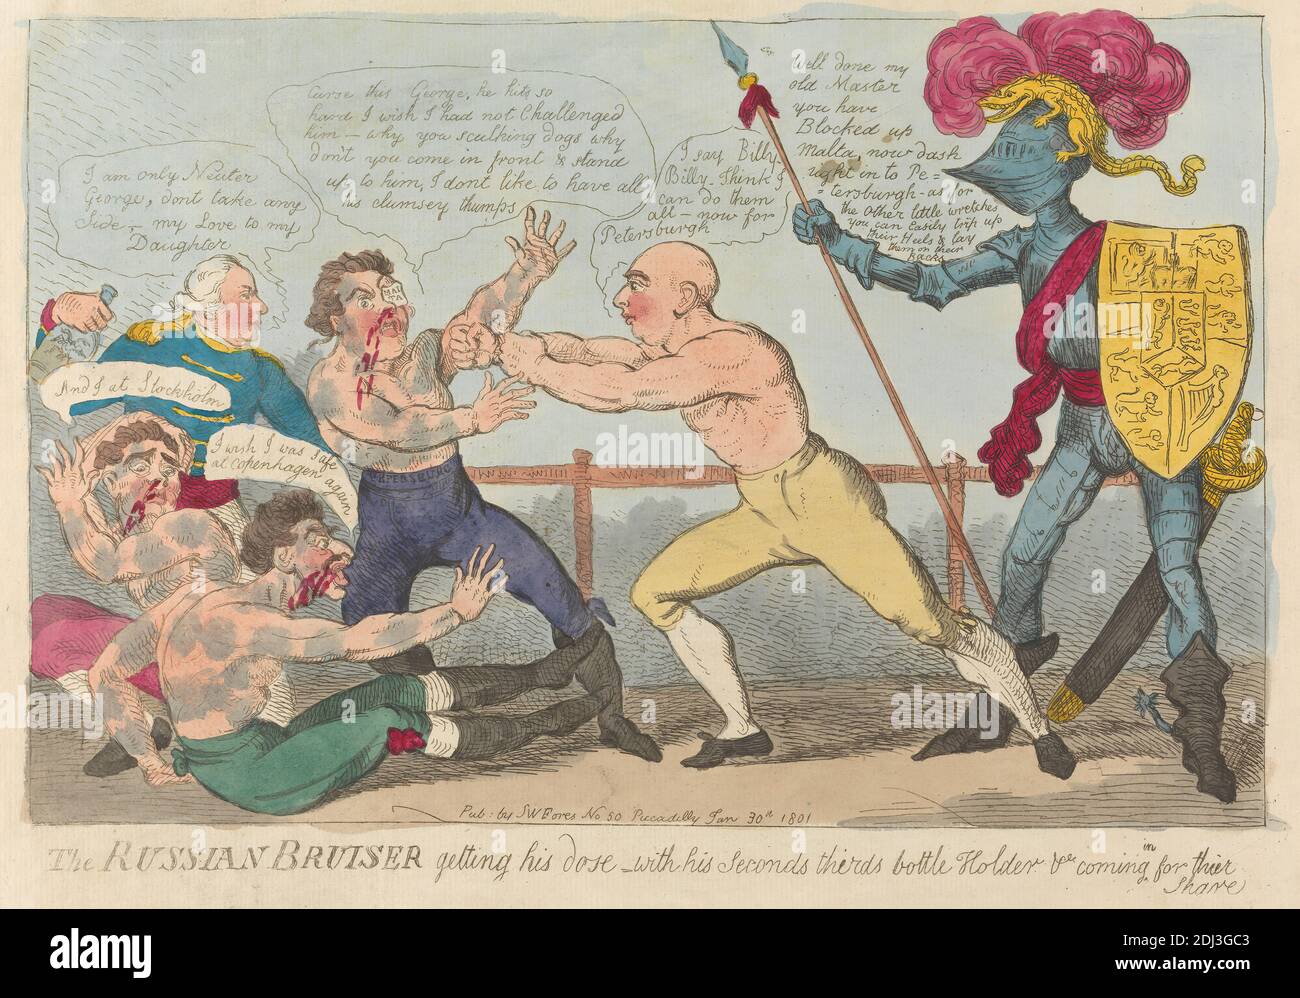 The Russian Bruiser Getting his Dose - With his Seconds Thirds bottle Holder and (?) coming in for their Share, Isaac Cruikshank, 1756–1810, British, 1801, Etching, hand-colored, Sheet: 8 1/4 x 12 5/8in. (21 x 32.1cm Stock Photo